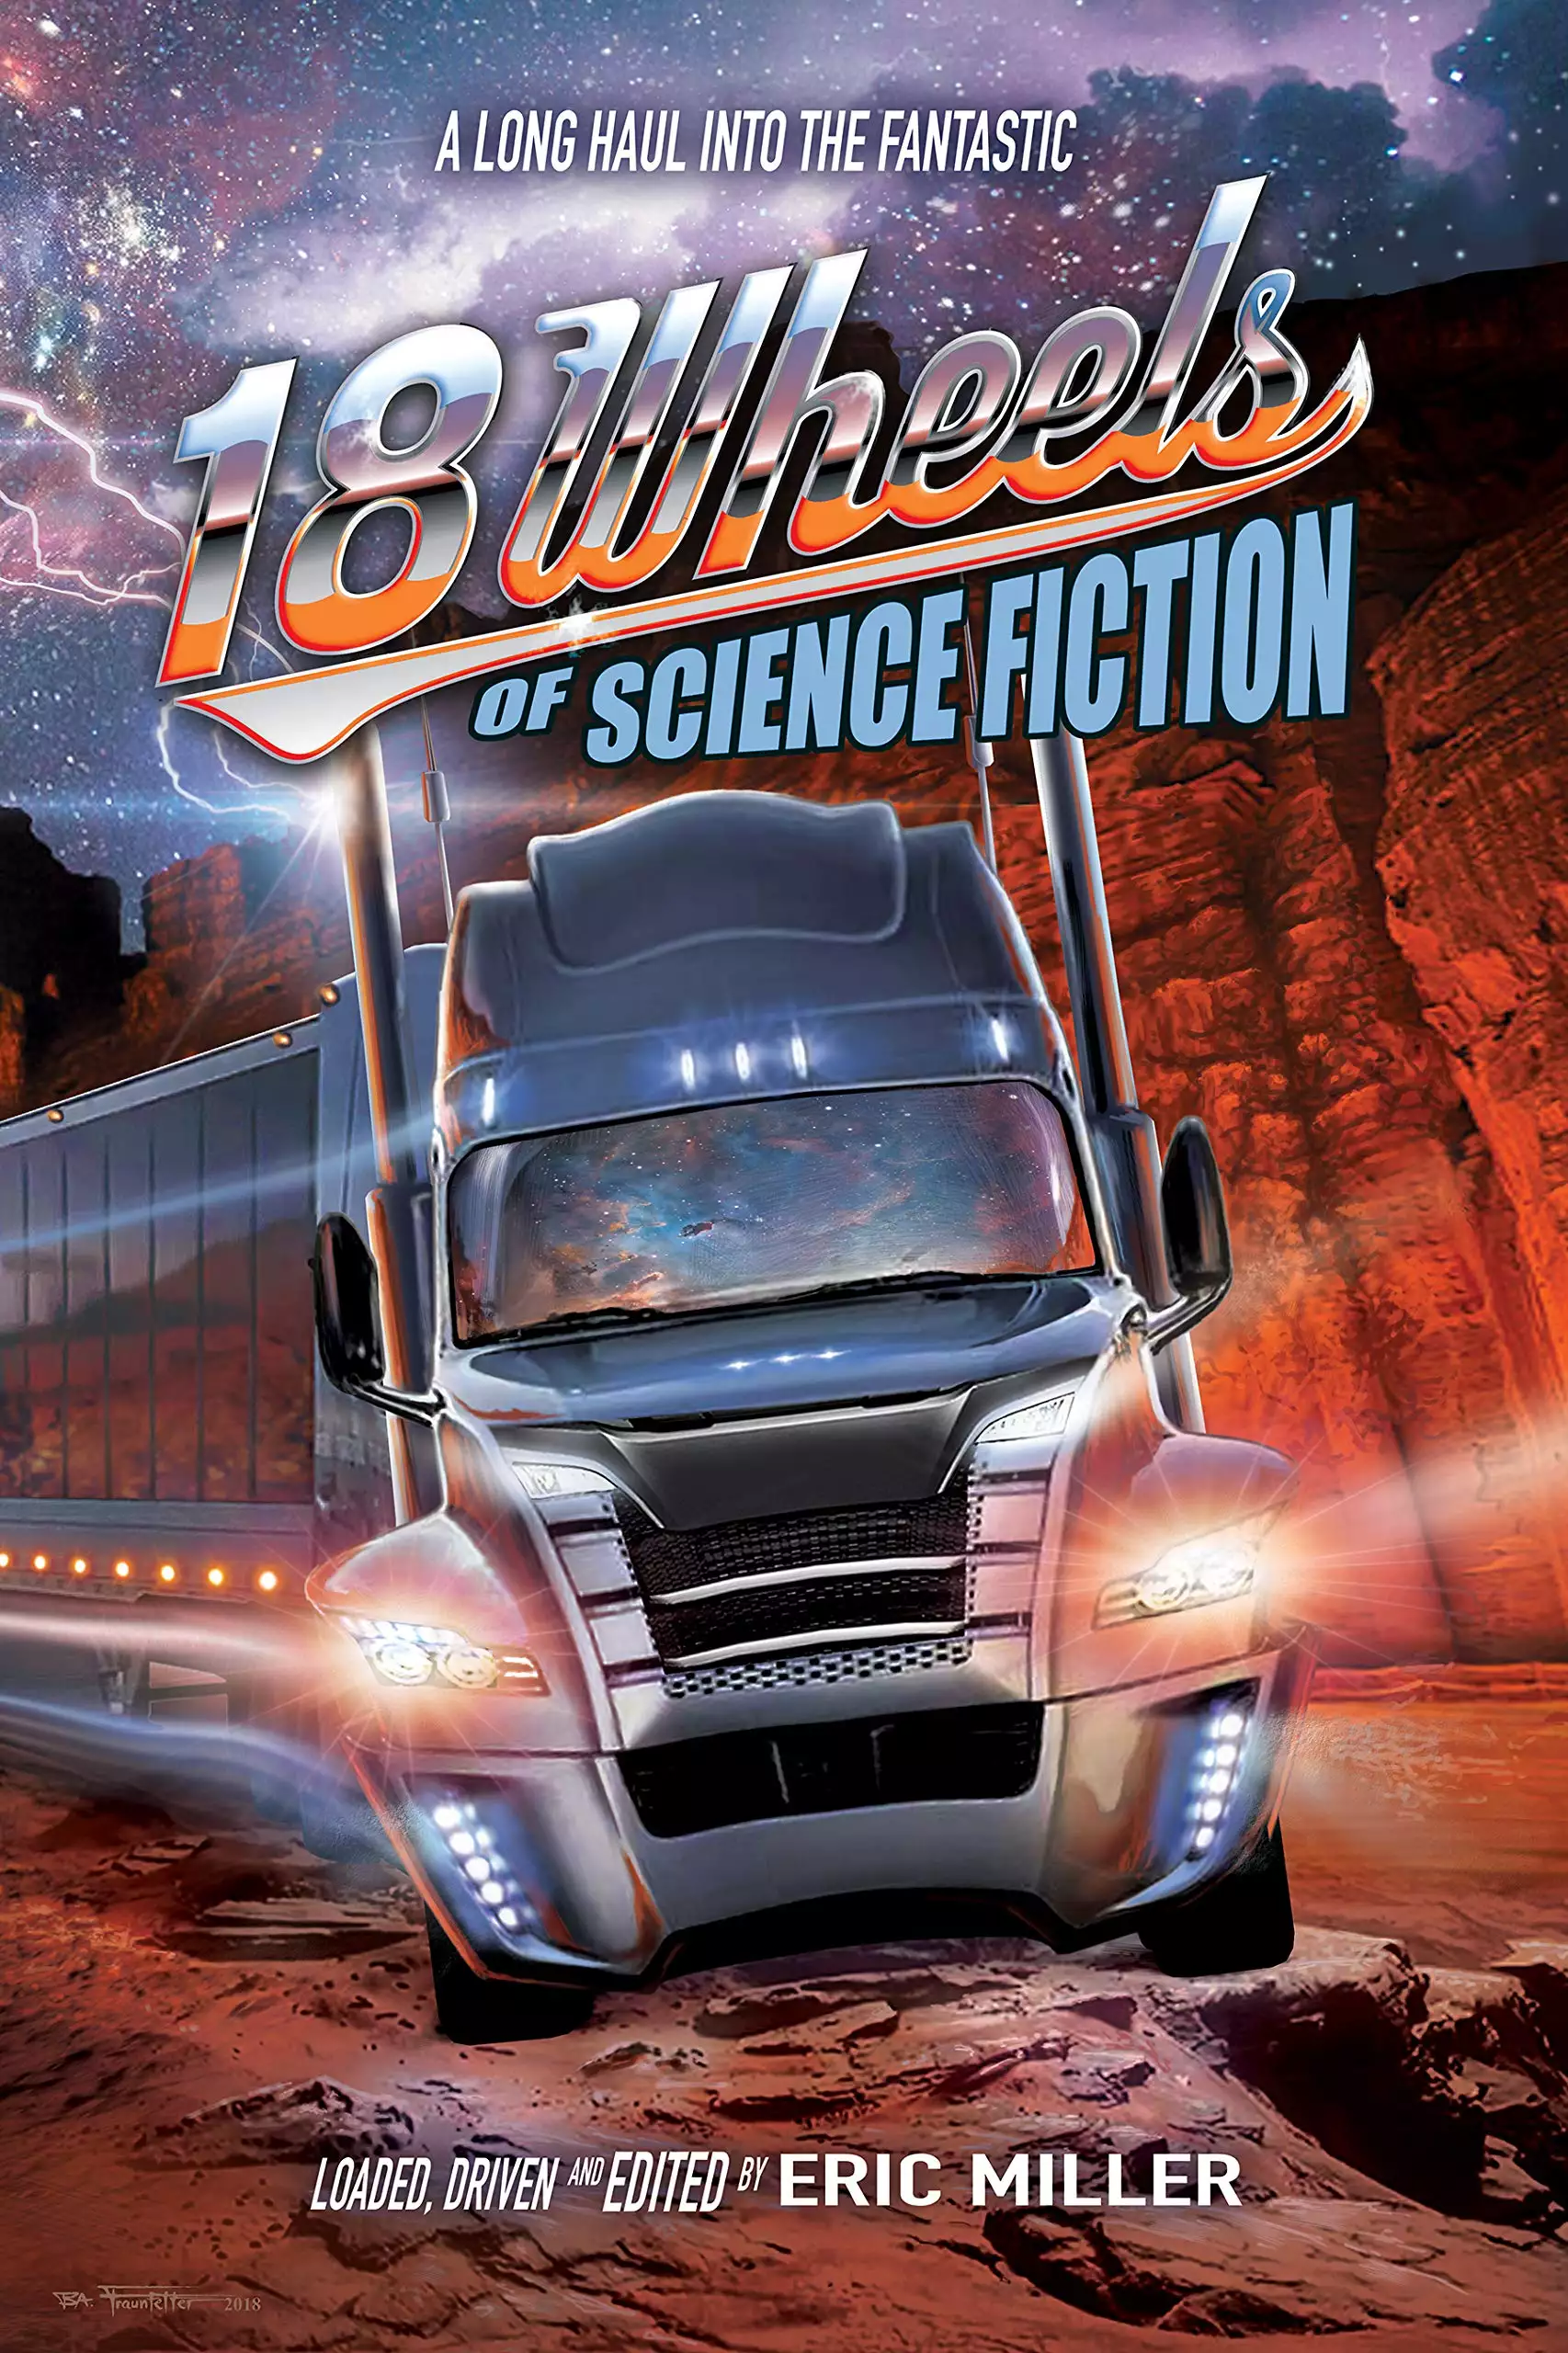 18 Wheels of Science Fiction: A Long Haul into the Fantastic